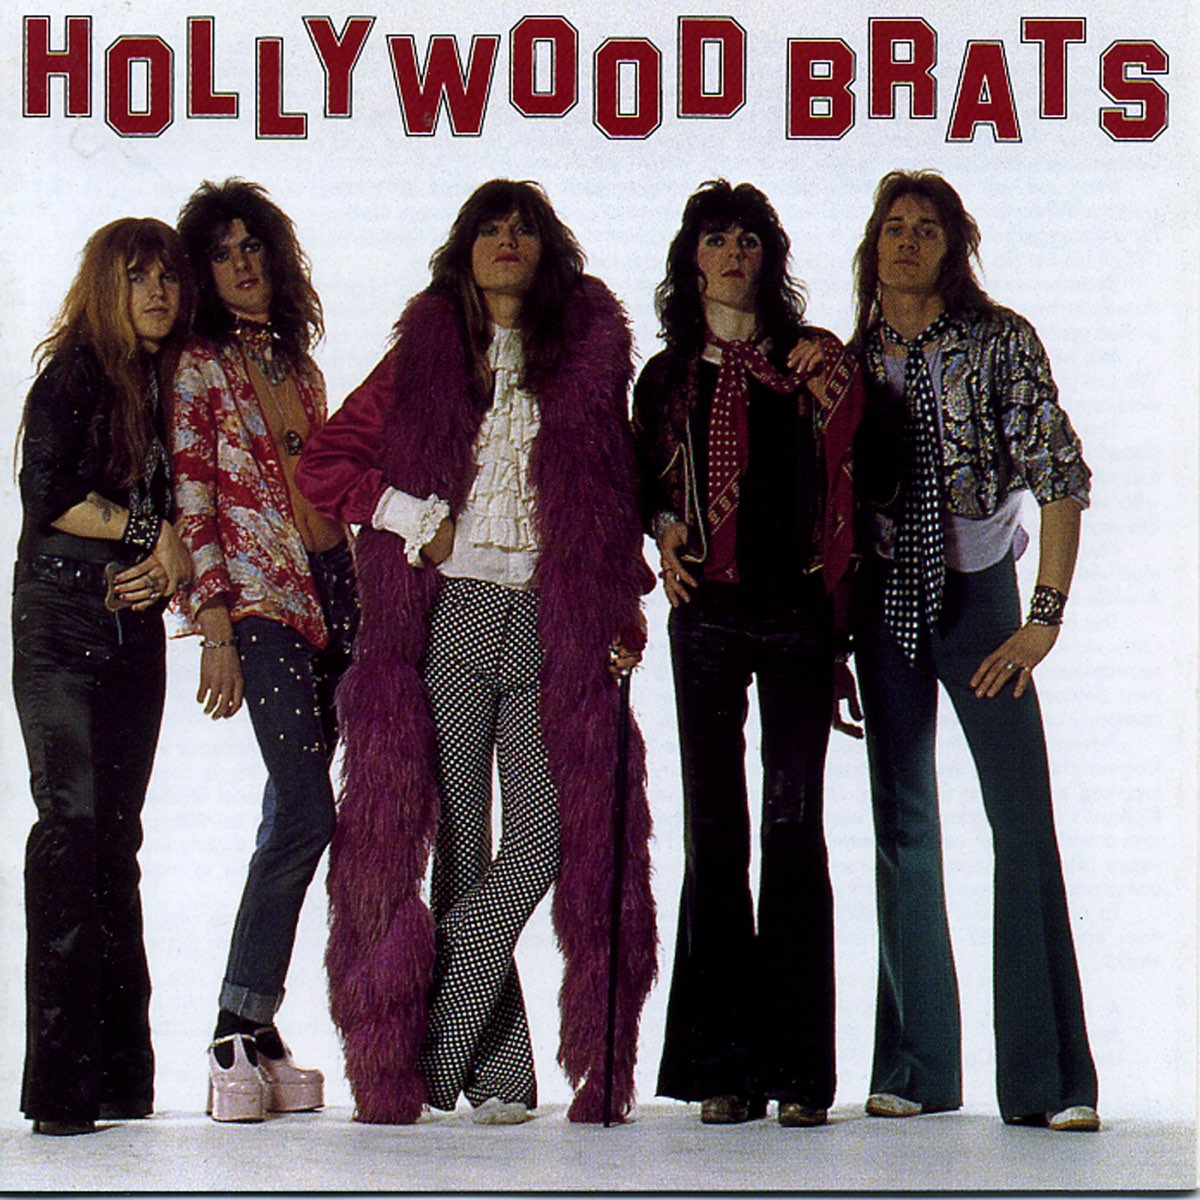 ‎Hollywood Brats by Hollywood Brats on Apple Music